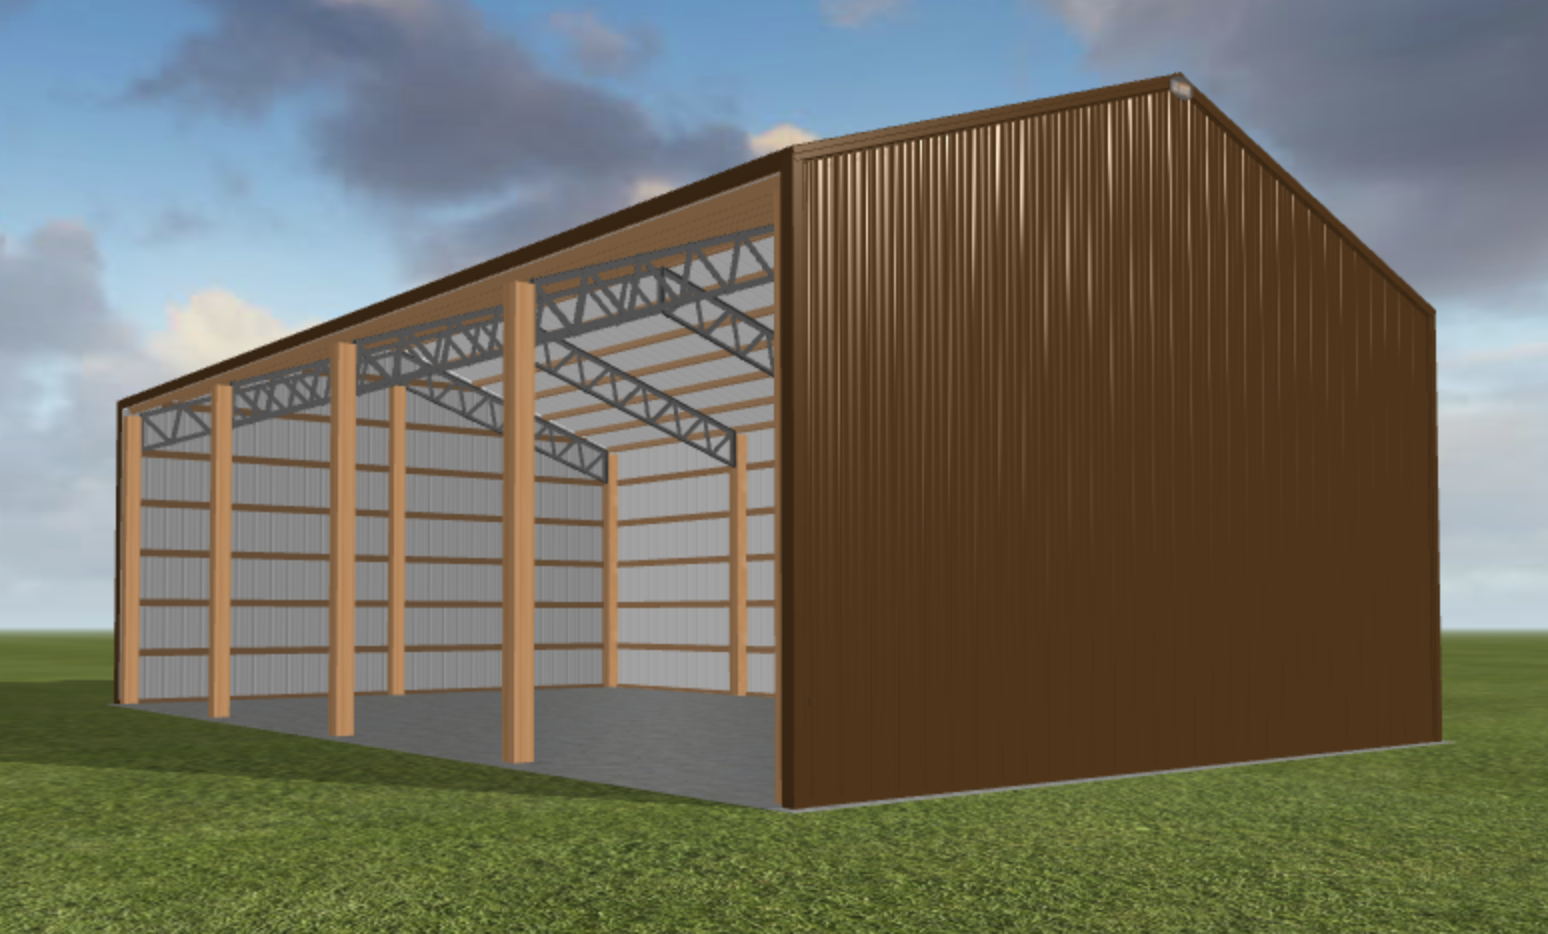 A 3d rendering of a barn with a metal roof.